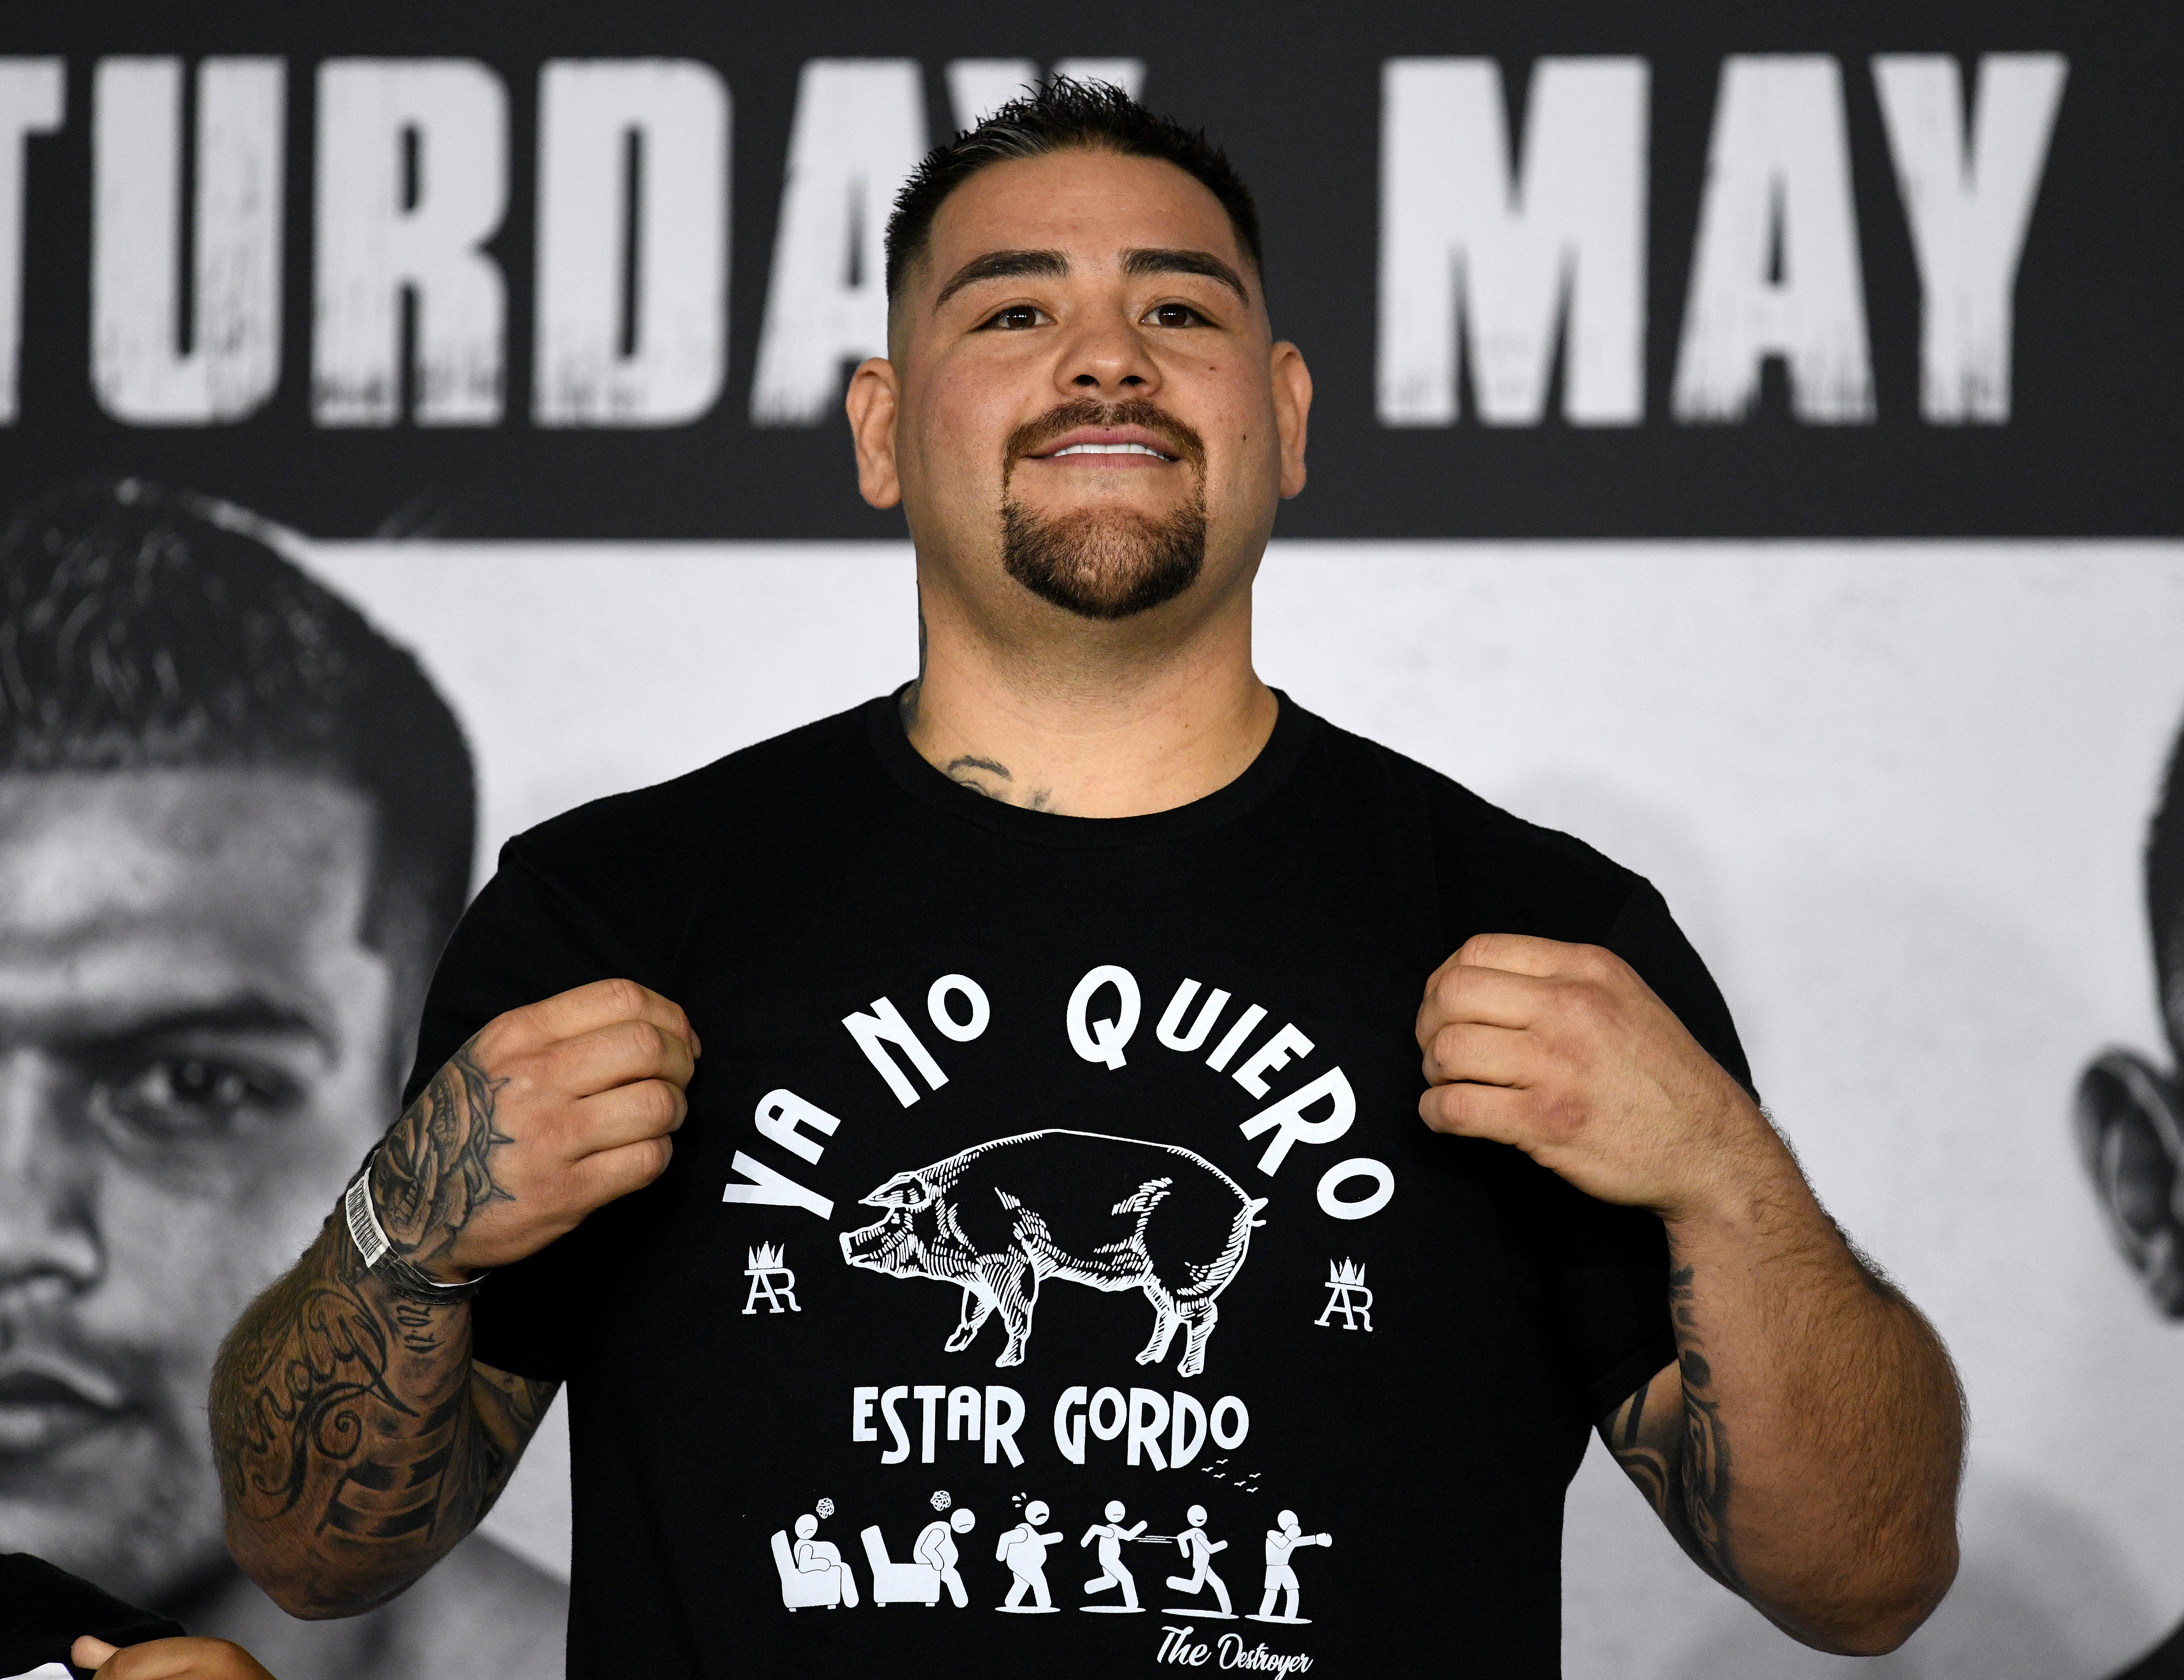 , Andy Ruiz Jr’s Twitter account posts messages about prostitutes and smoking weed but boxer claims he was hacked